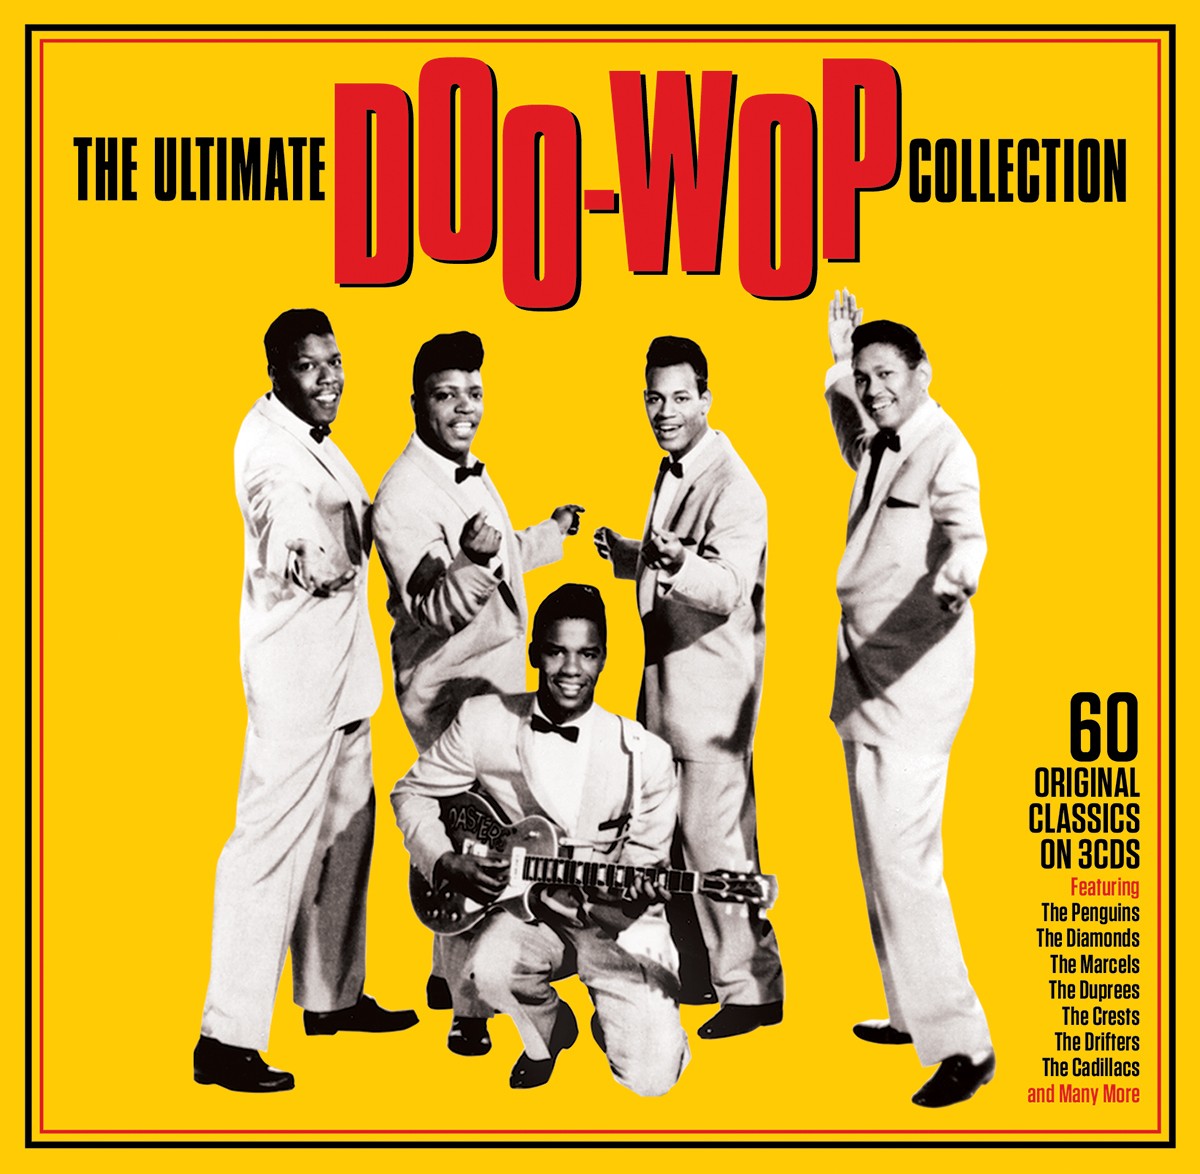 ULTIMATE DOO-WOP COLLECTION: (2 CDS) - Penguins, Diamonds, Marcels, Duprees, Crests, Drifters, Dell-Vikings...